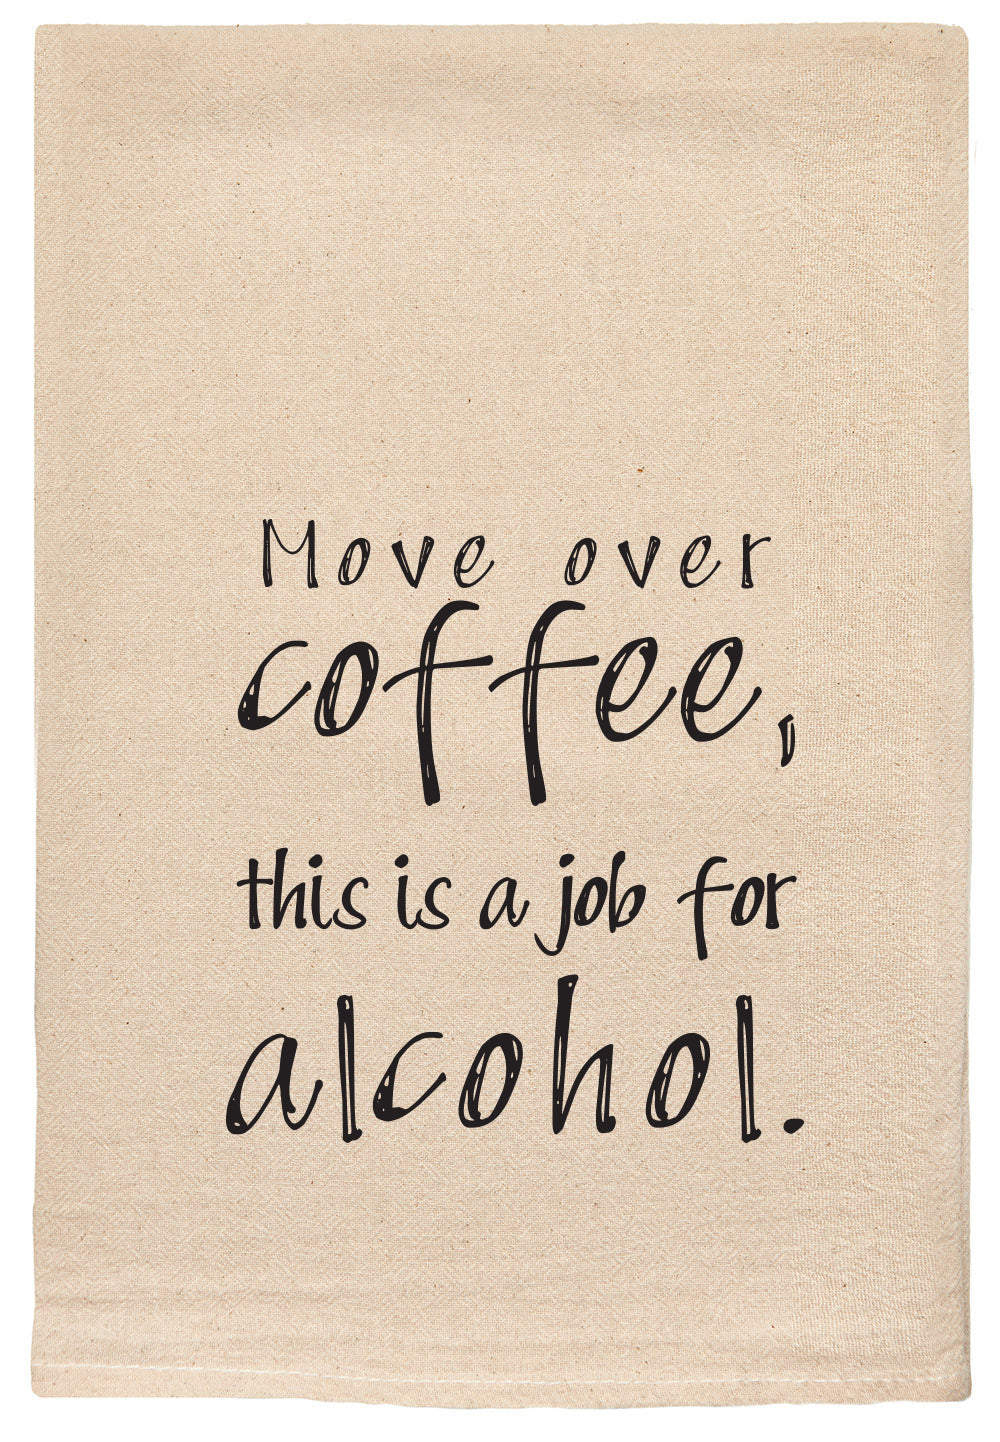 Move over coffee, this is a job for alcohol.